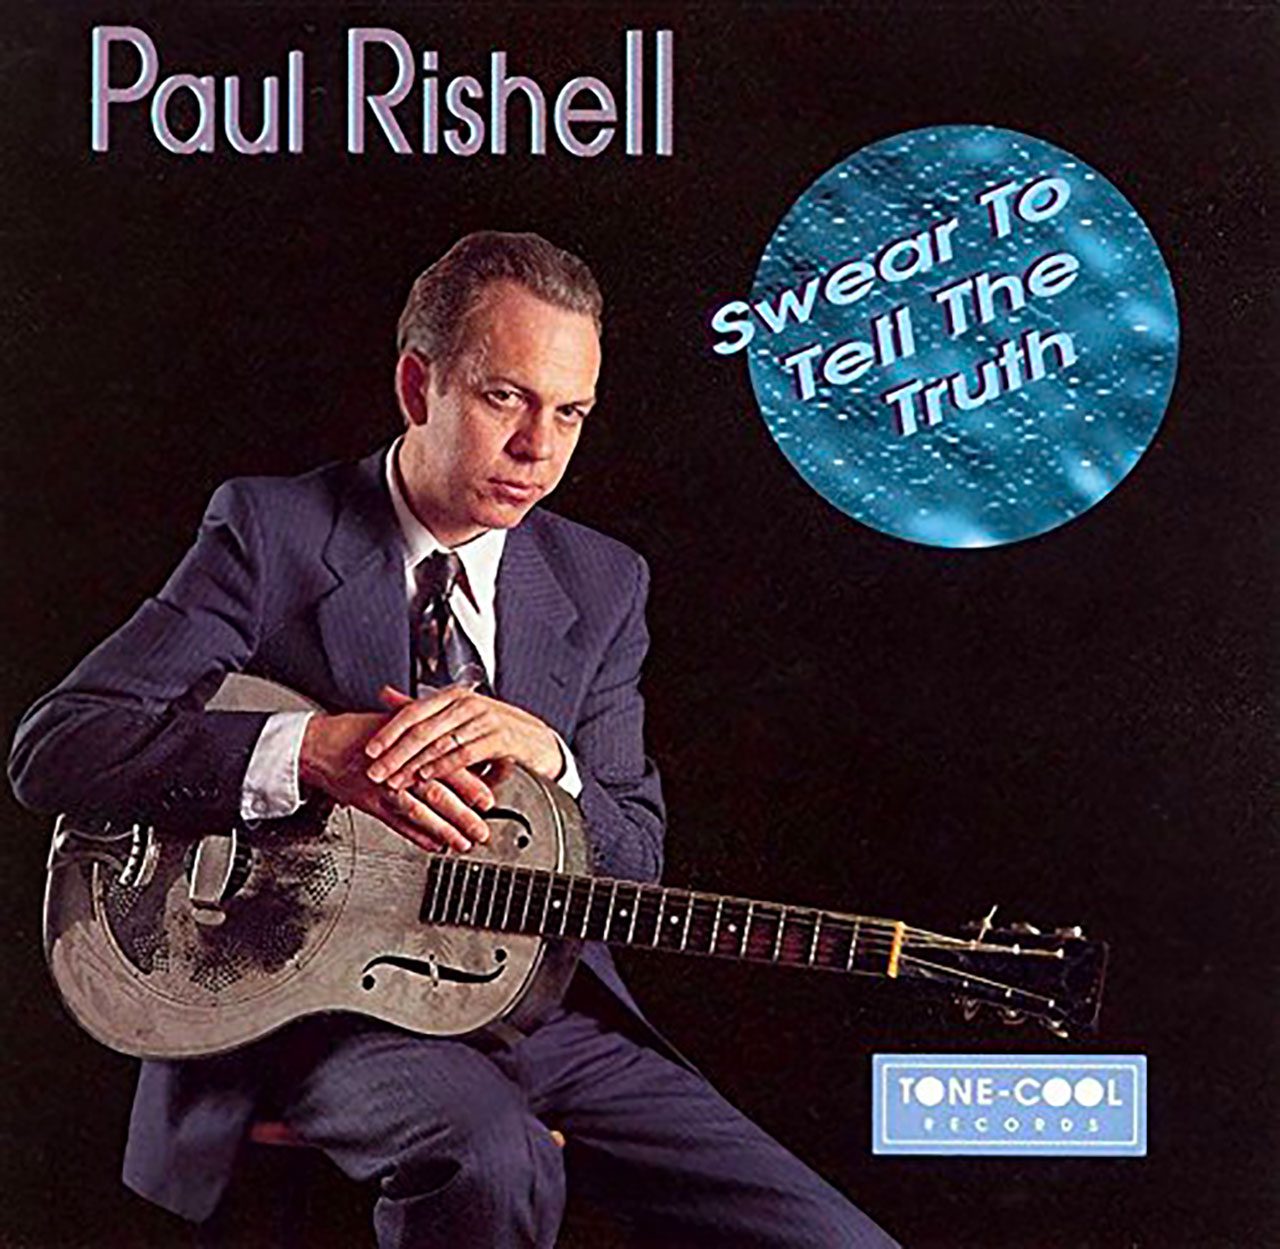 Paul Rishell – Swear To Tell The Truth cover album